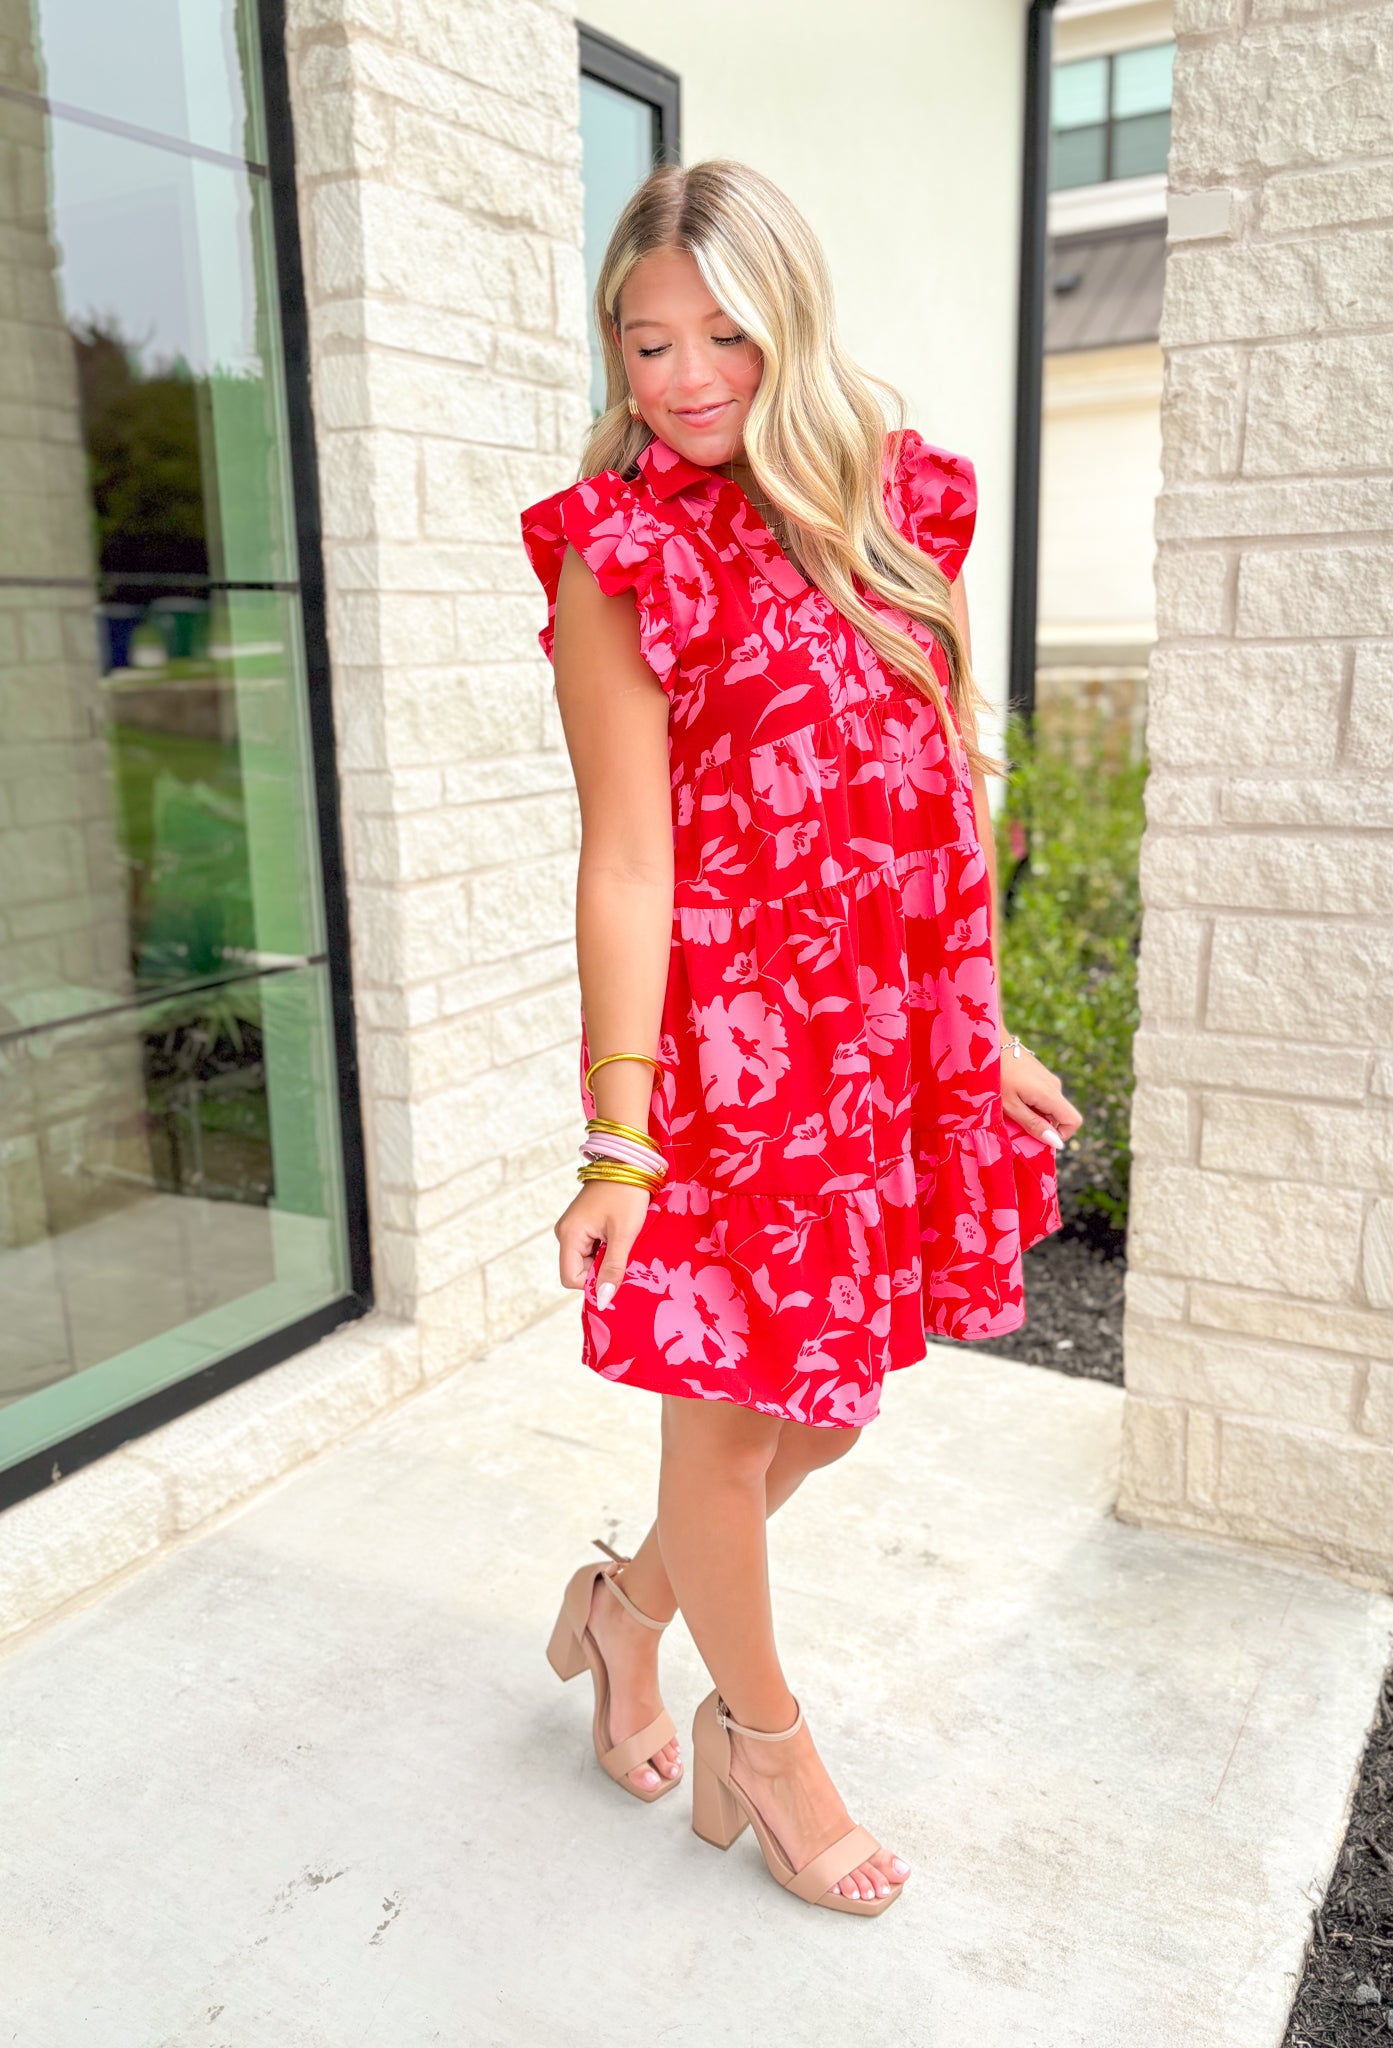 Feeling Flirty Floral Dress in Red, ruffle sleeve tiered dress in red with a bright pink floral print, collar and v-neck